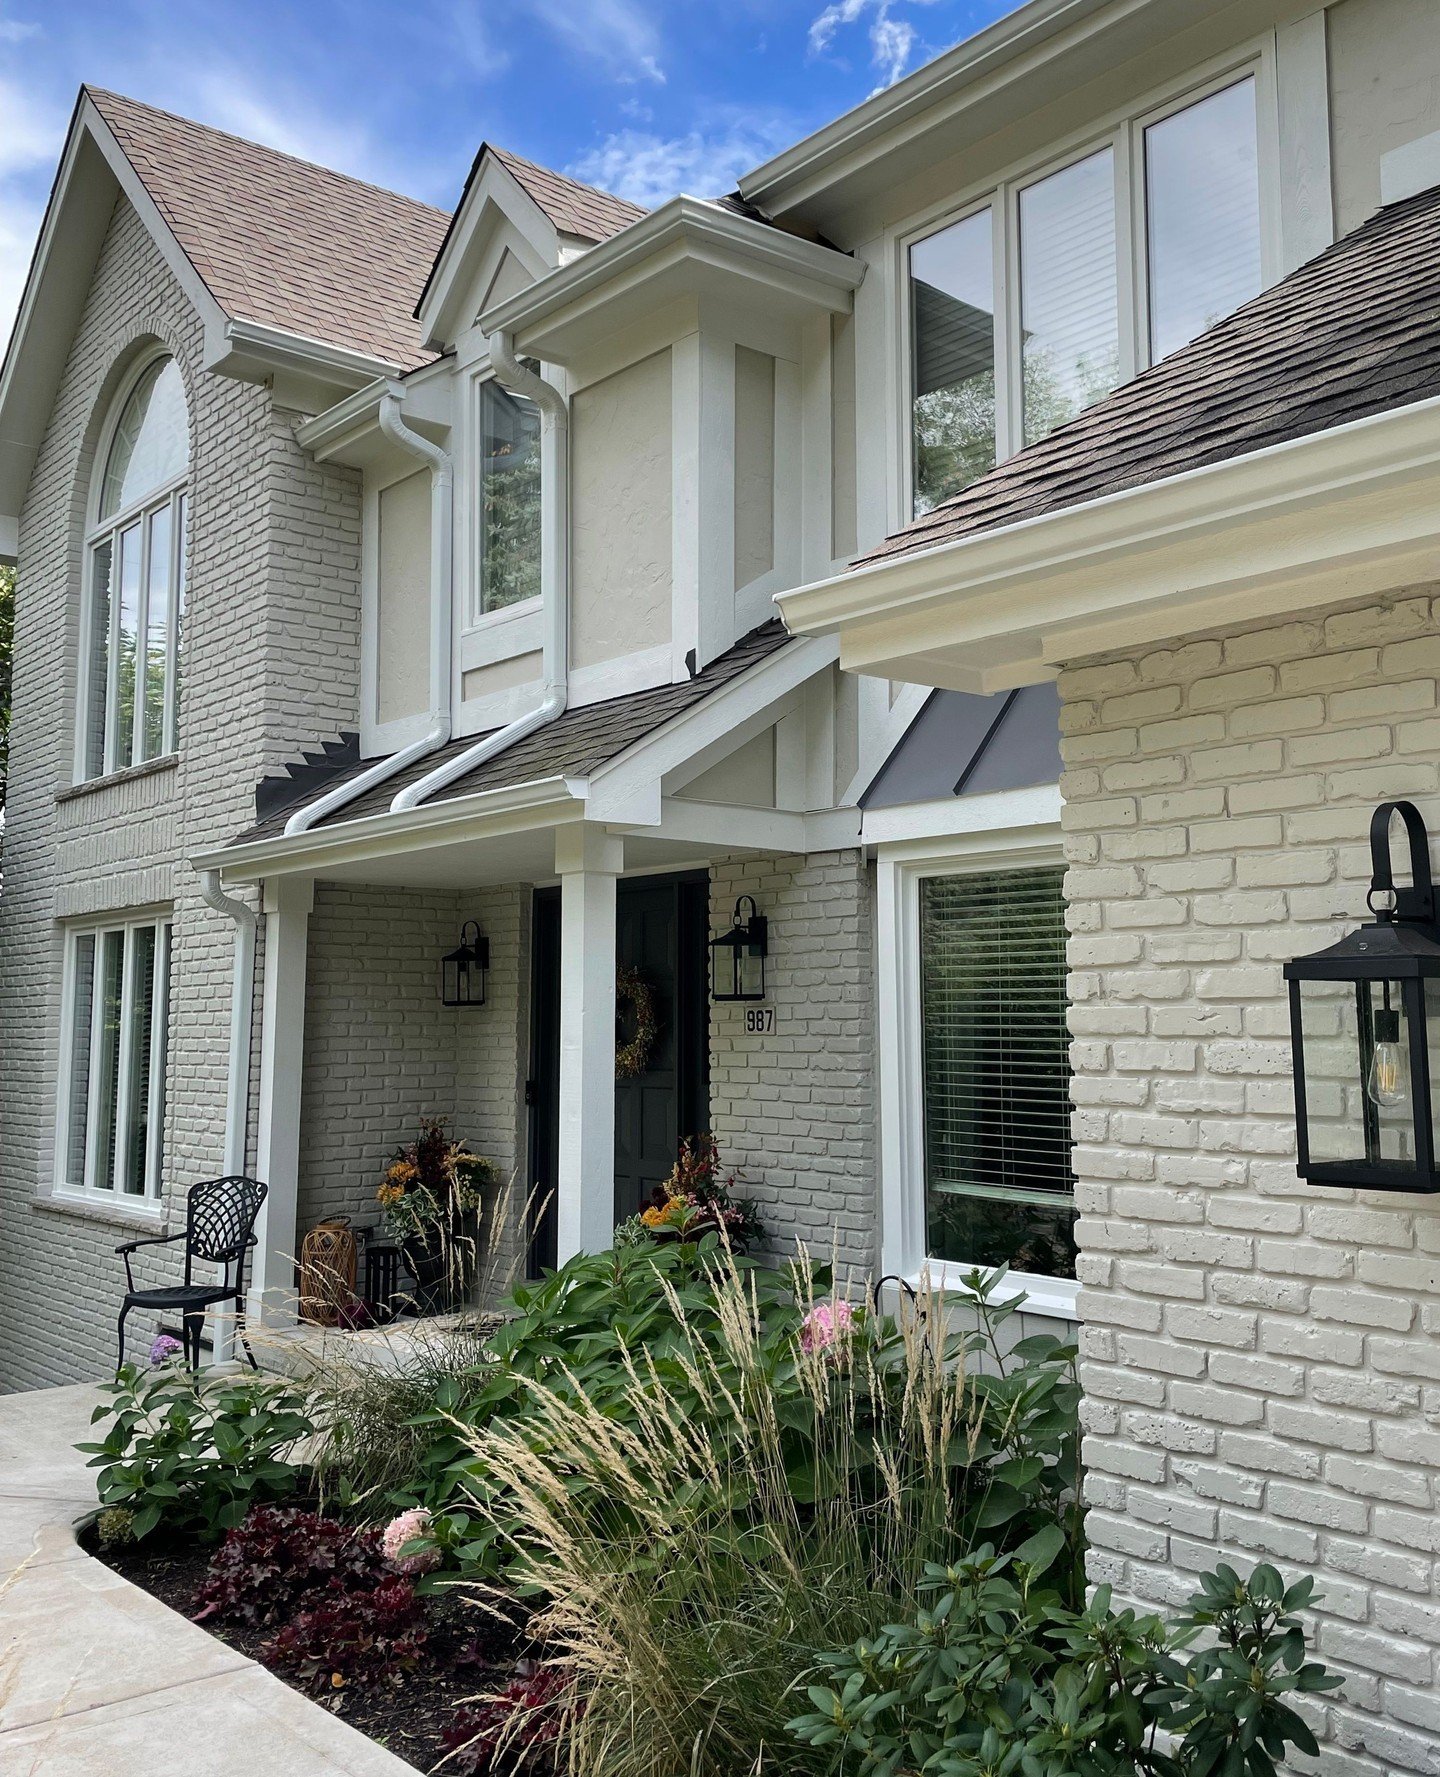 Exterior painting season is here! Before this home's refresh, it had the typical Glen Ellyn white and brown Tudor-style exterior. The homeowners wanted to freshen the exterior up and make it more current however they weren't sure how to make this hap